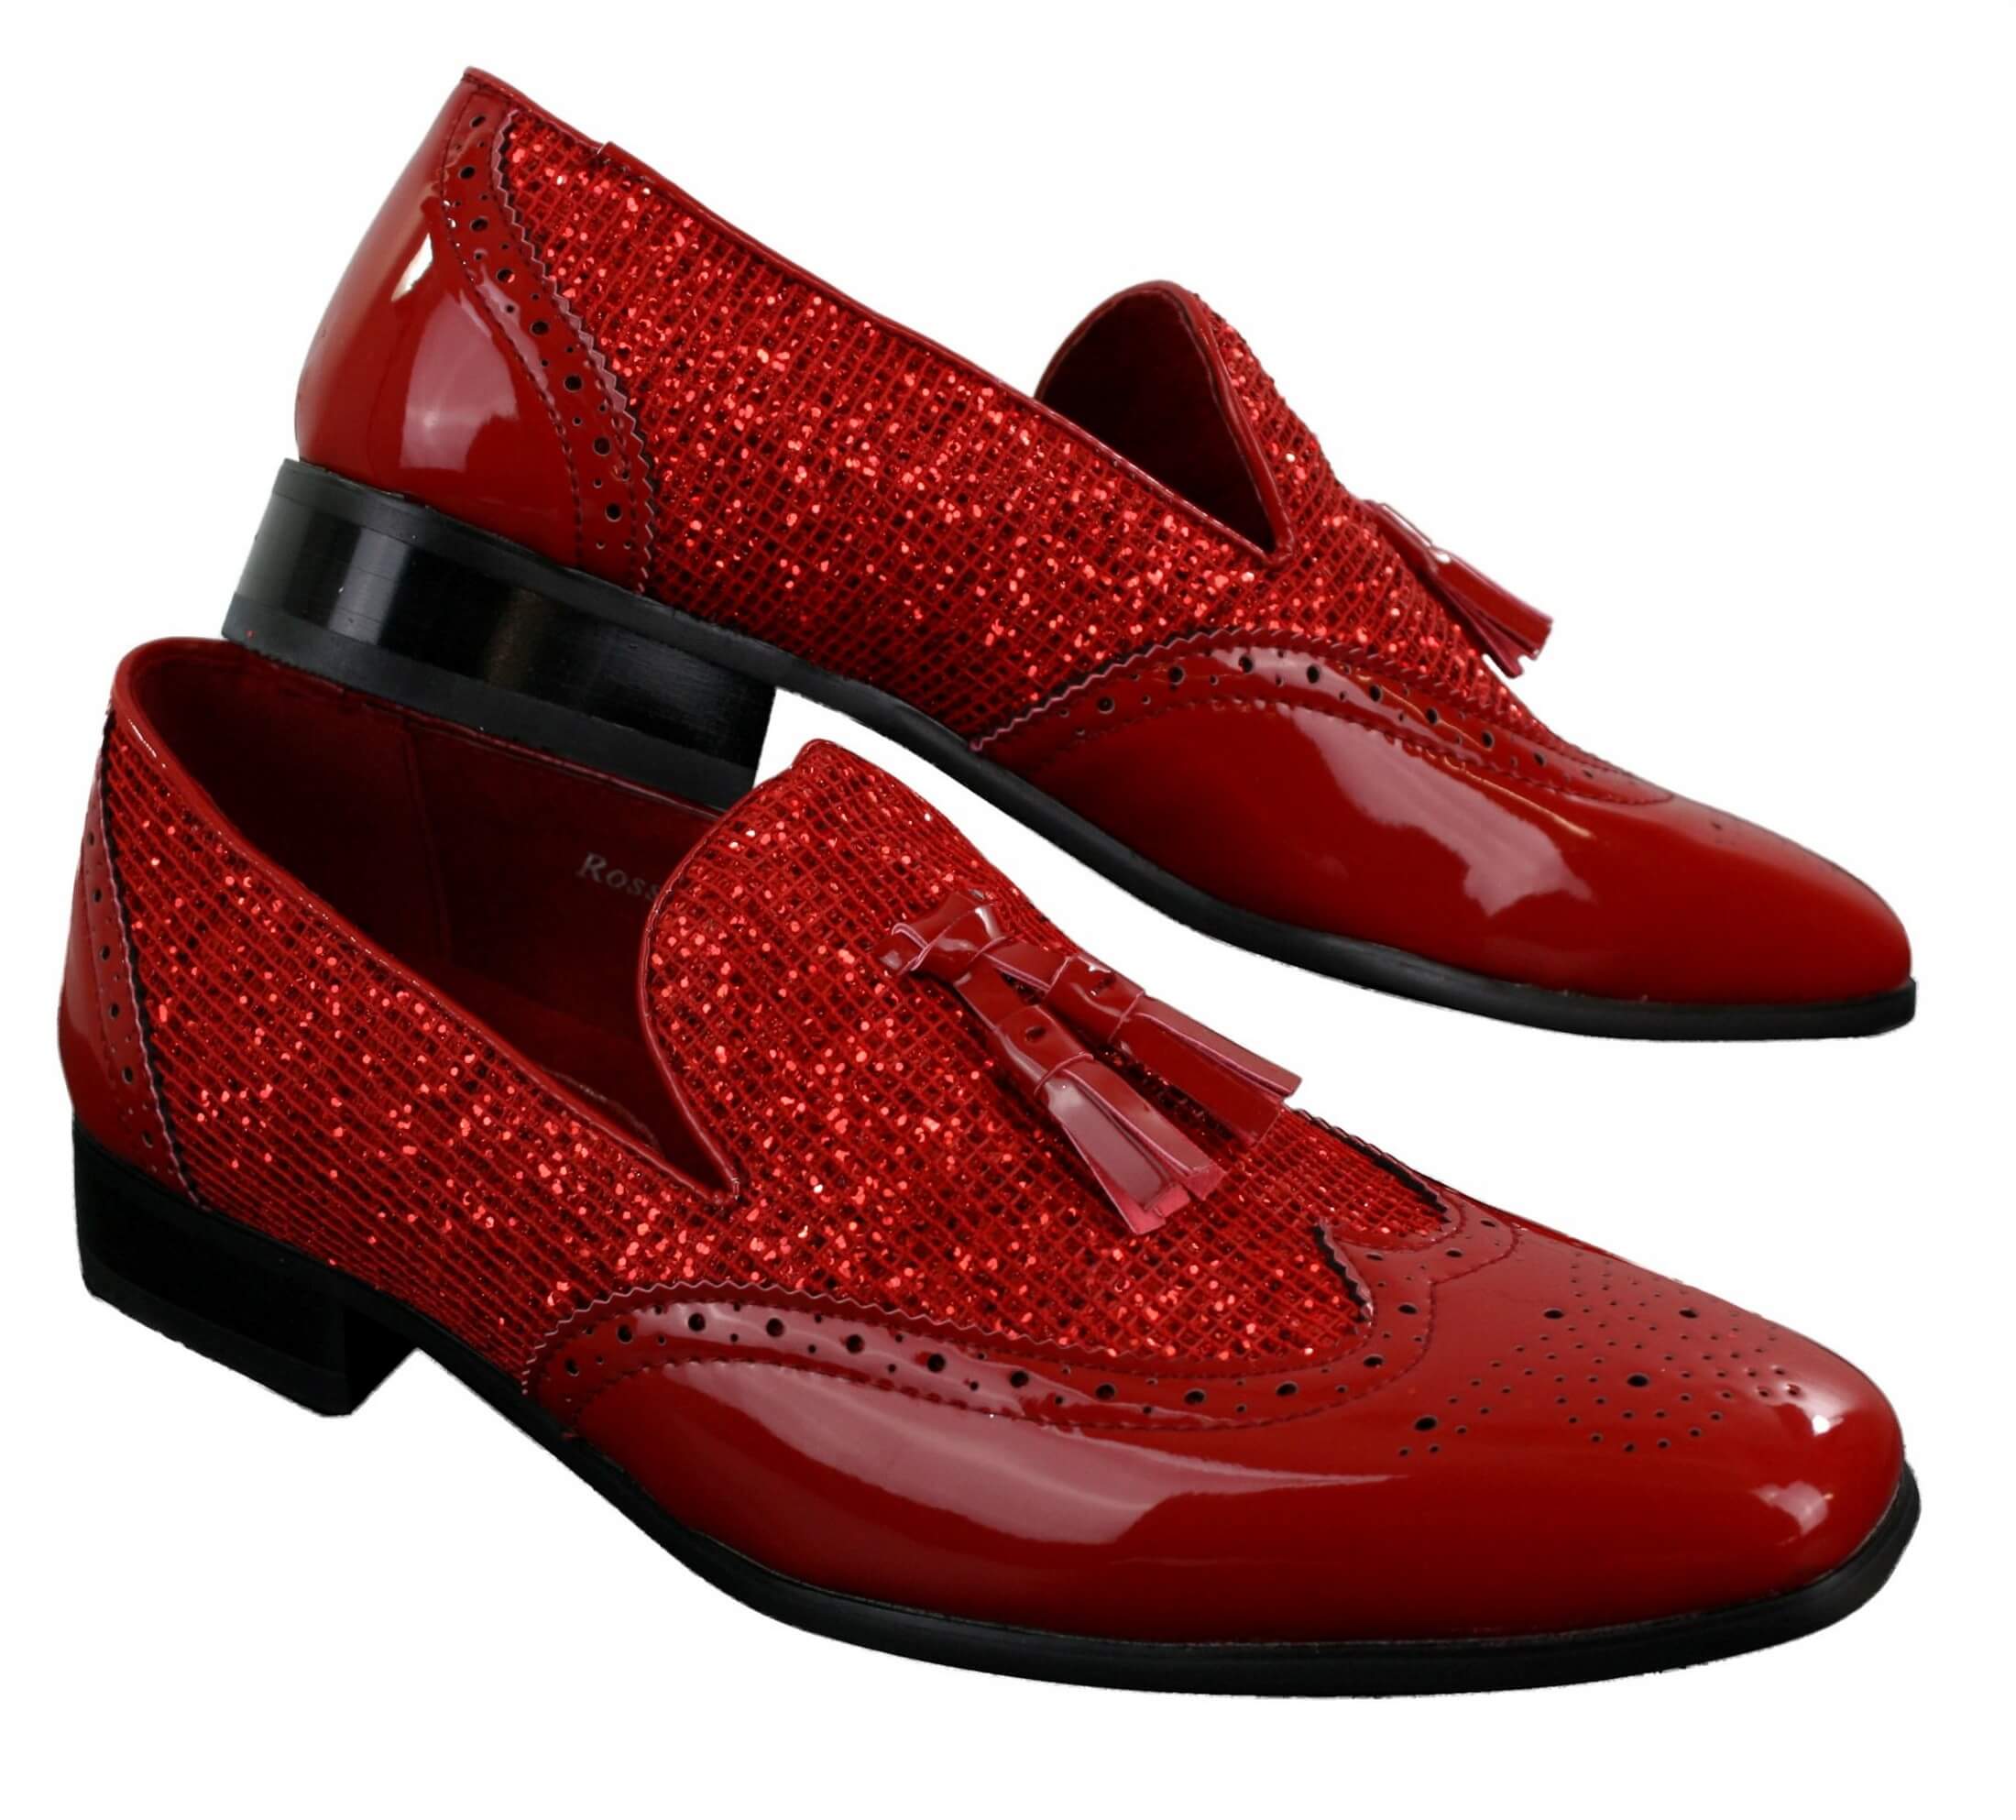 Mens Smart Party Shiny Tassle Shoes Red Silver Black Slip On Patent